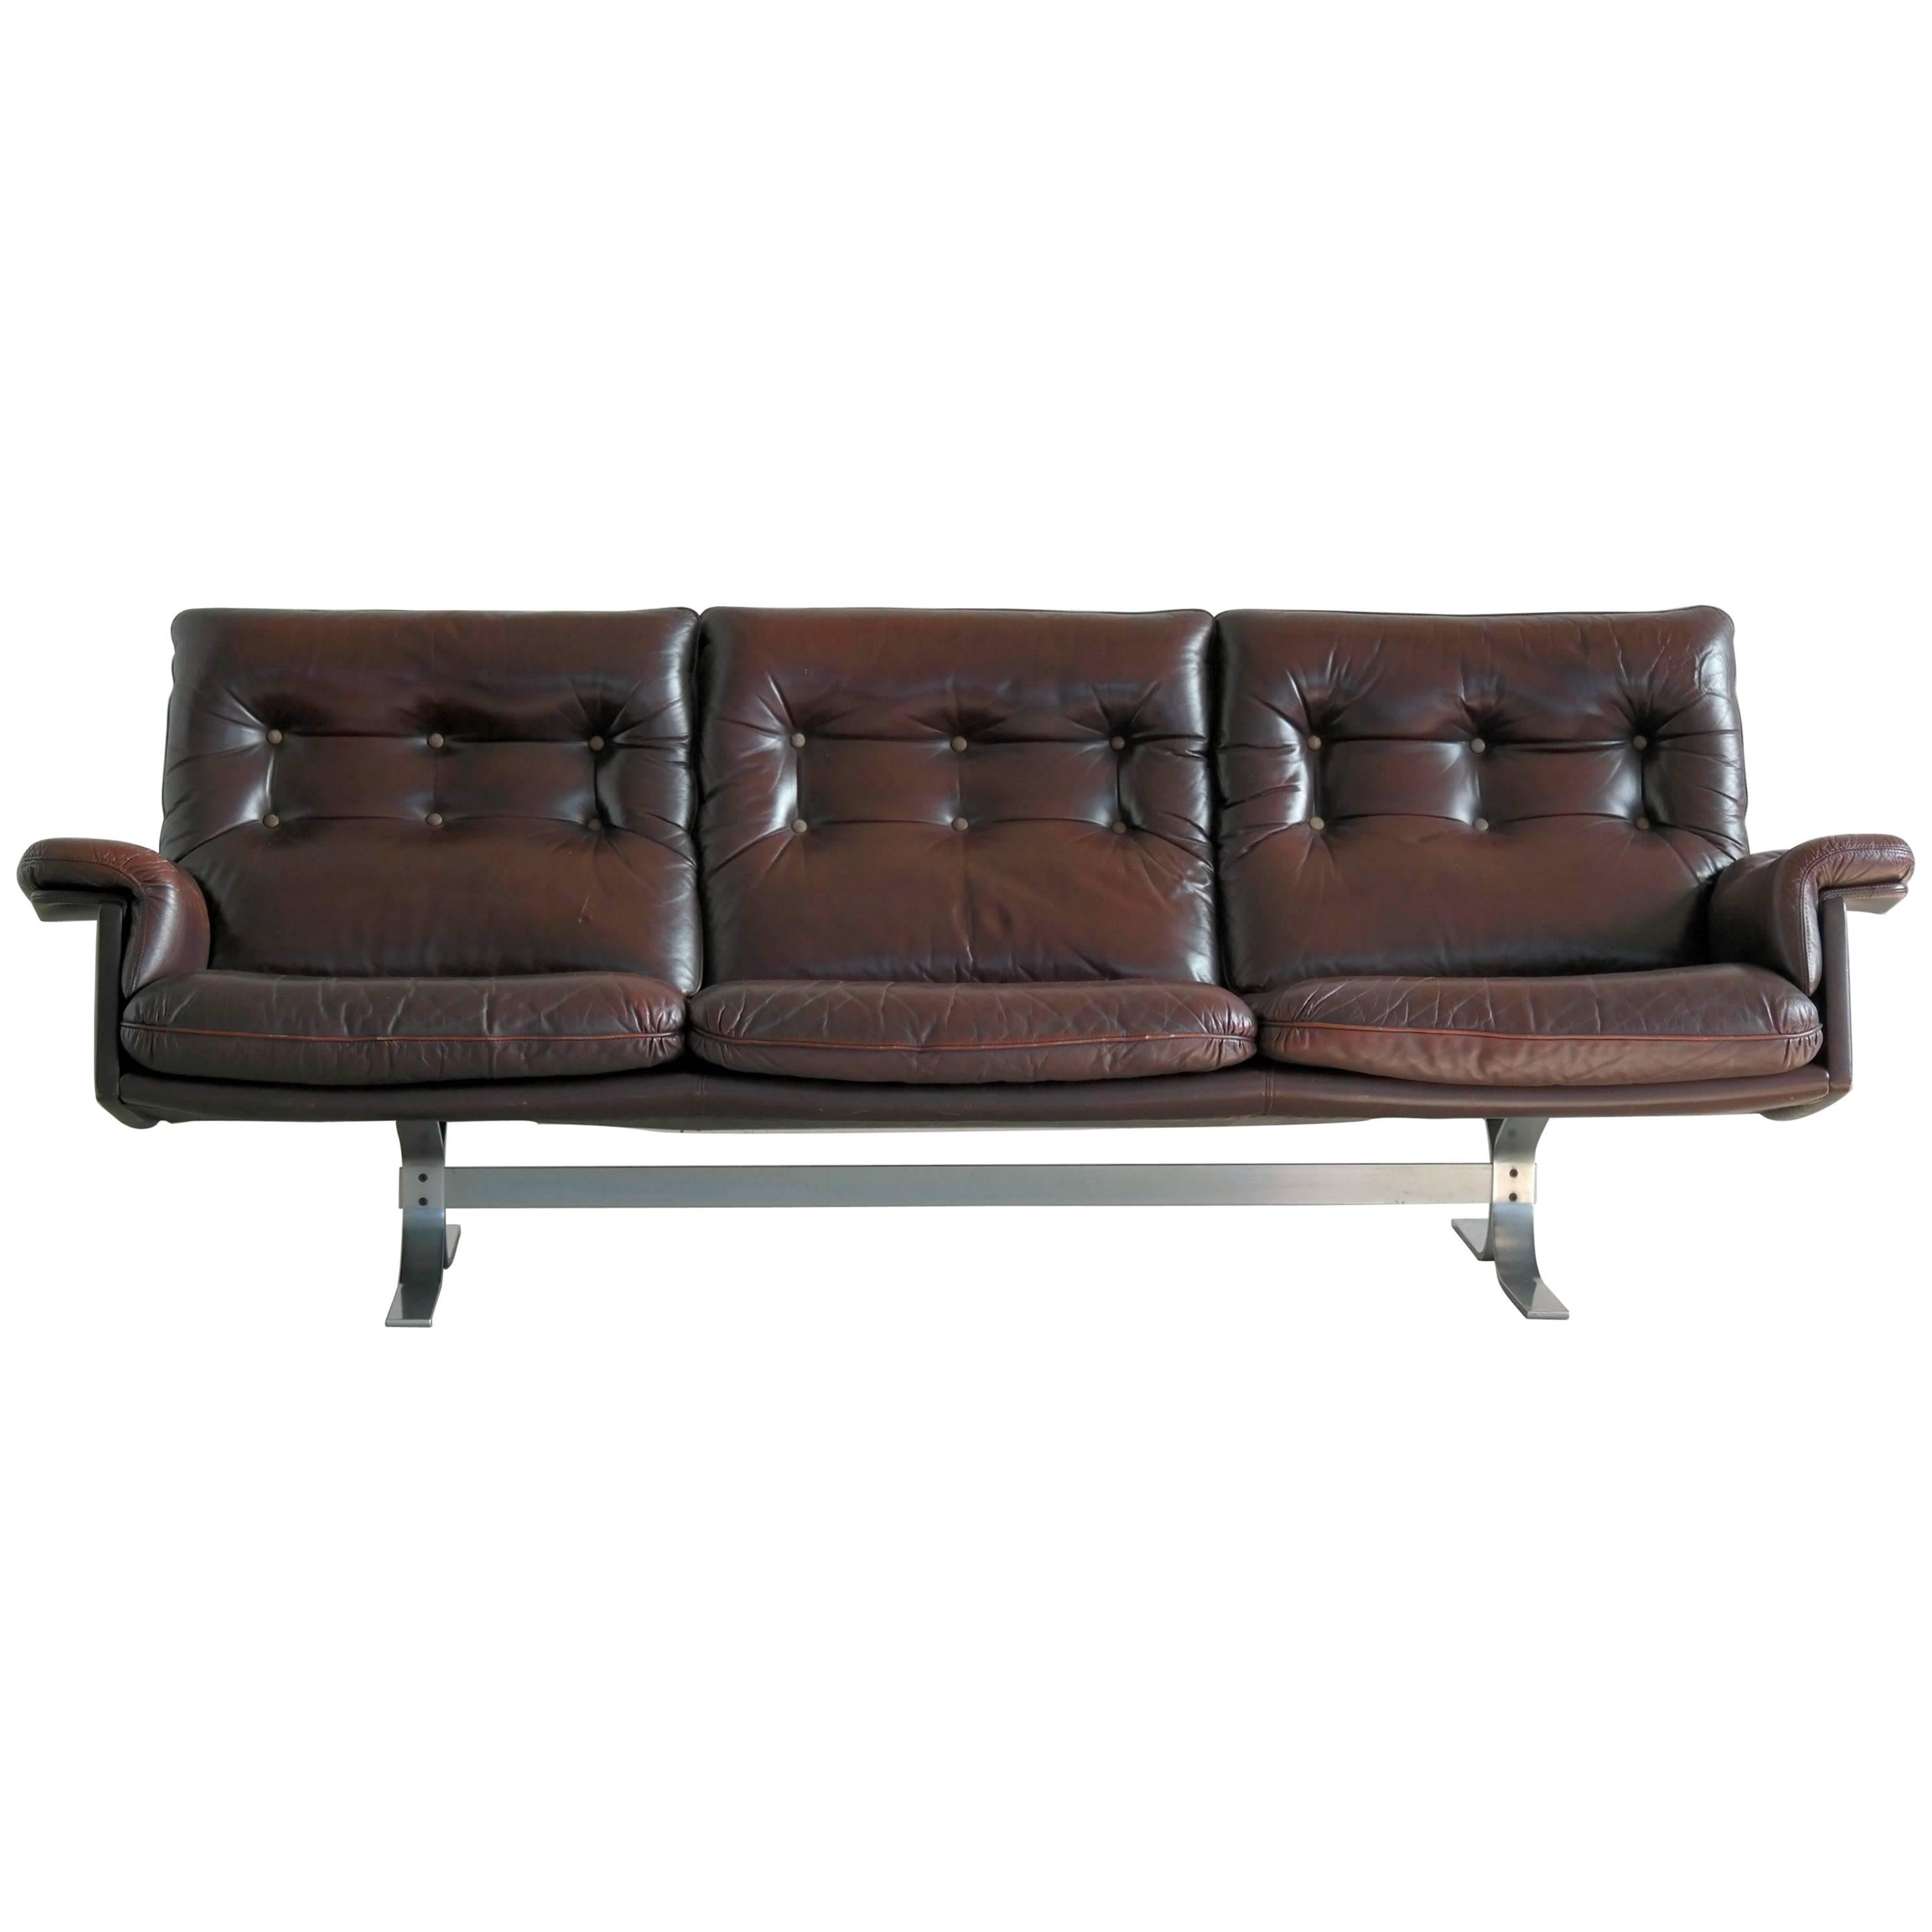 Arne Norell for Vatne Rare Sofa in Patent Leather and Steel